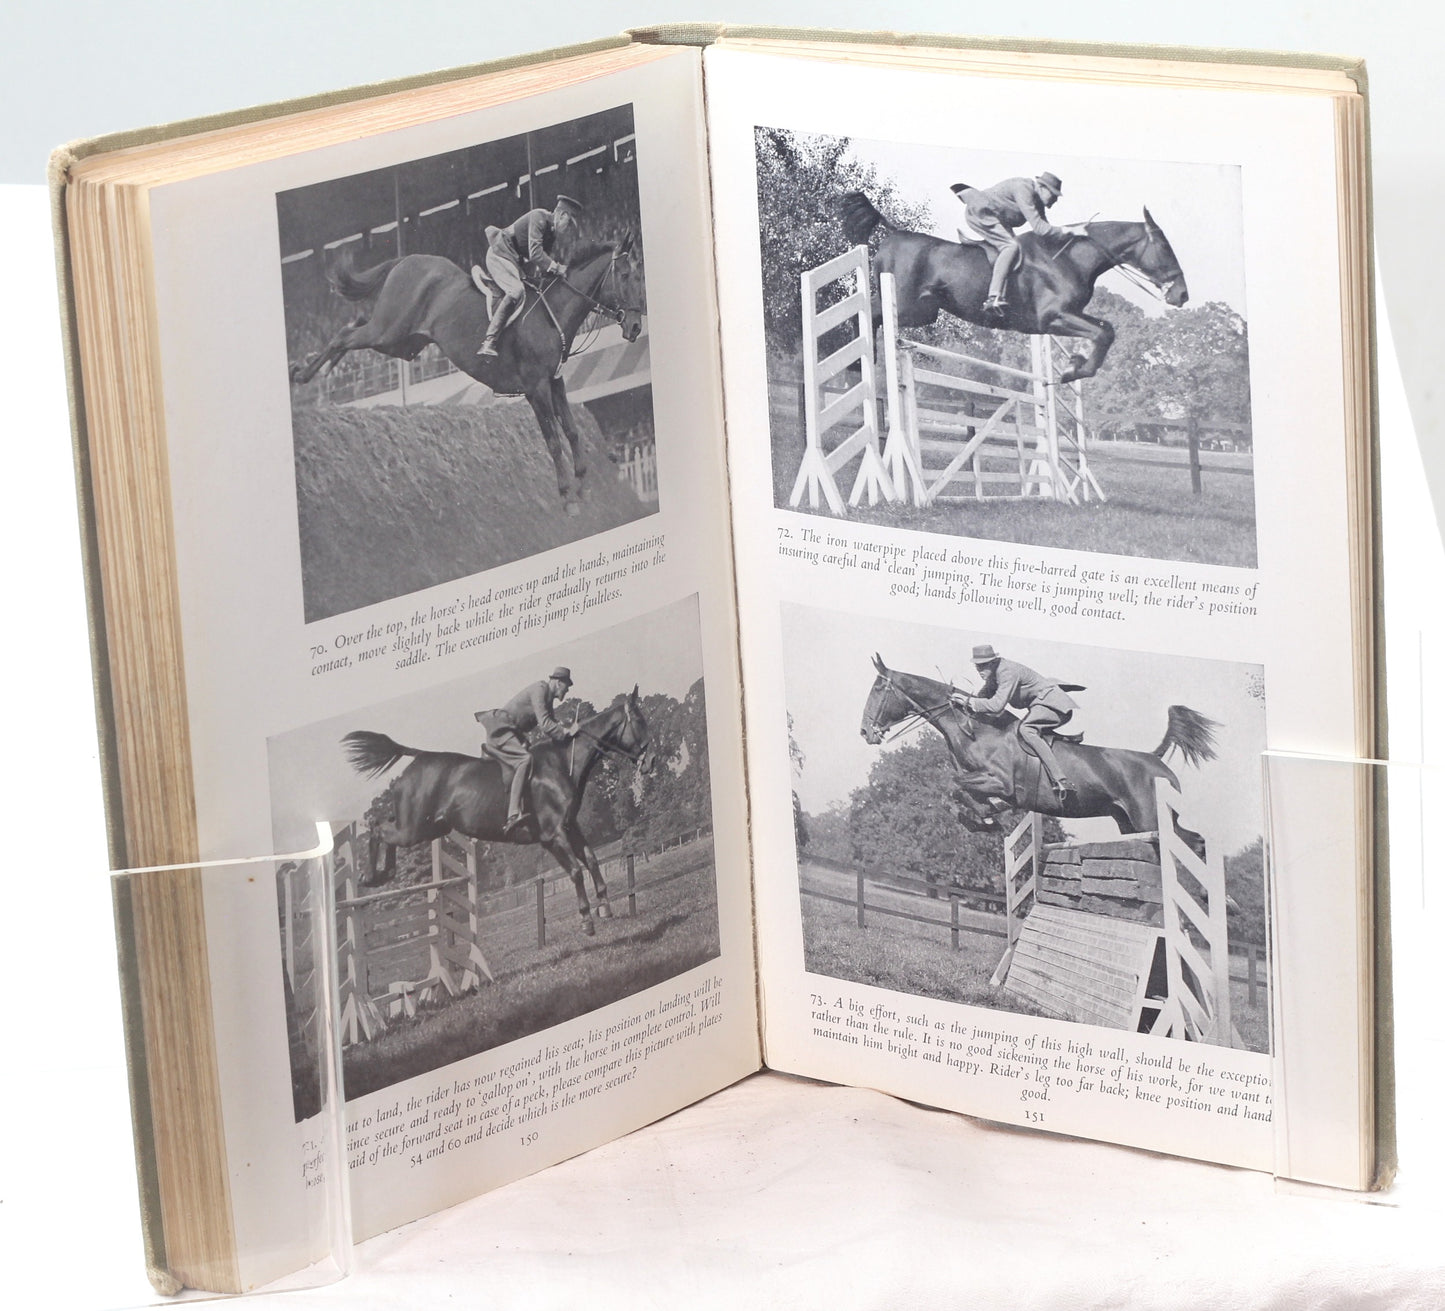 Equitation by Henry Wynmalen, 2nd Ed 1959